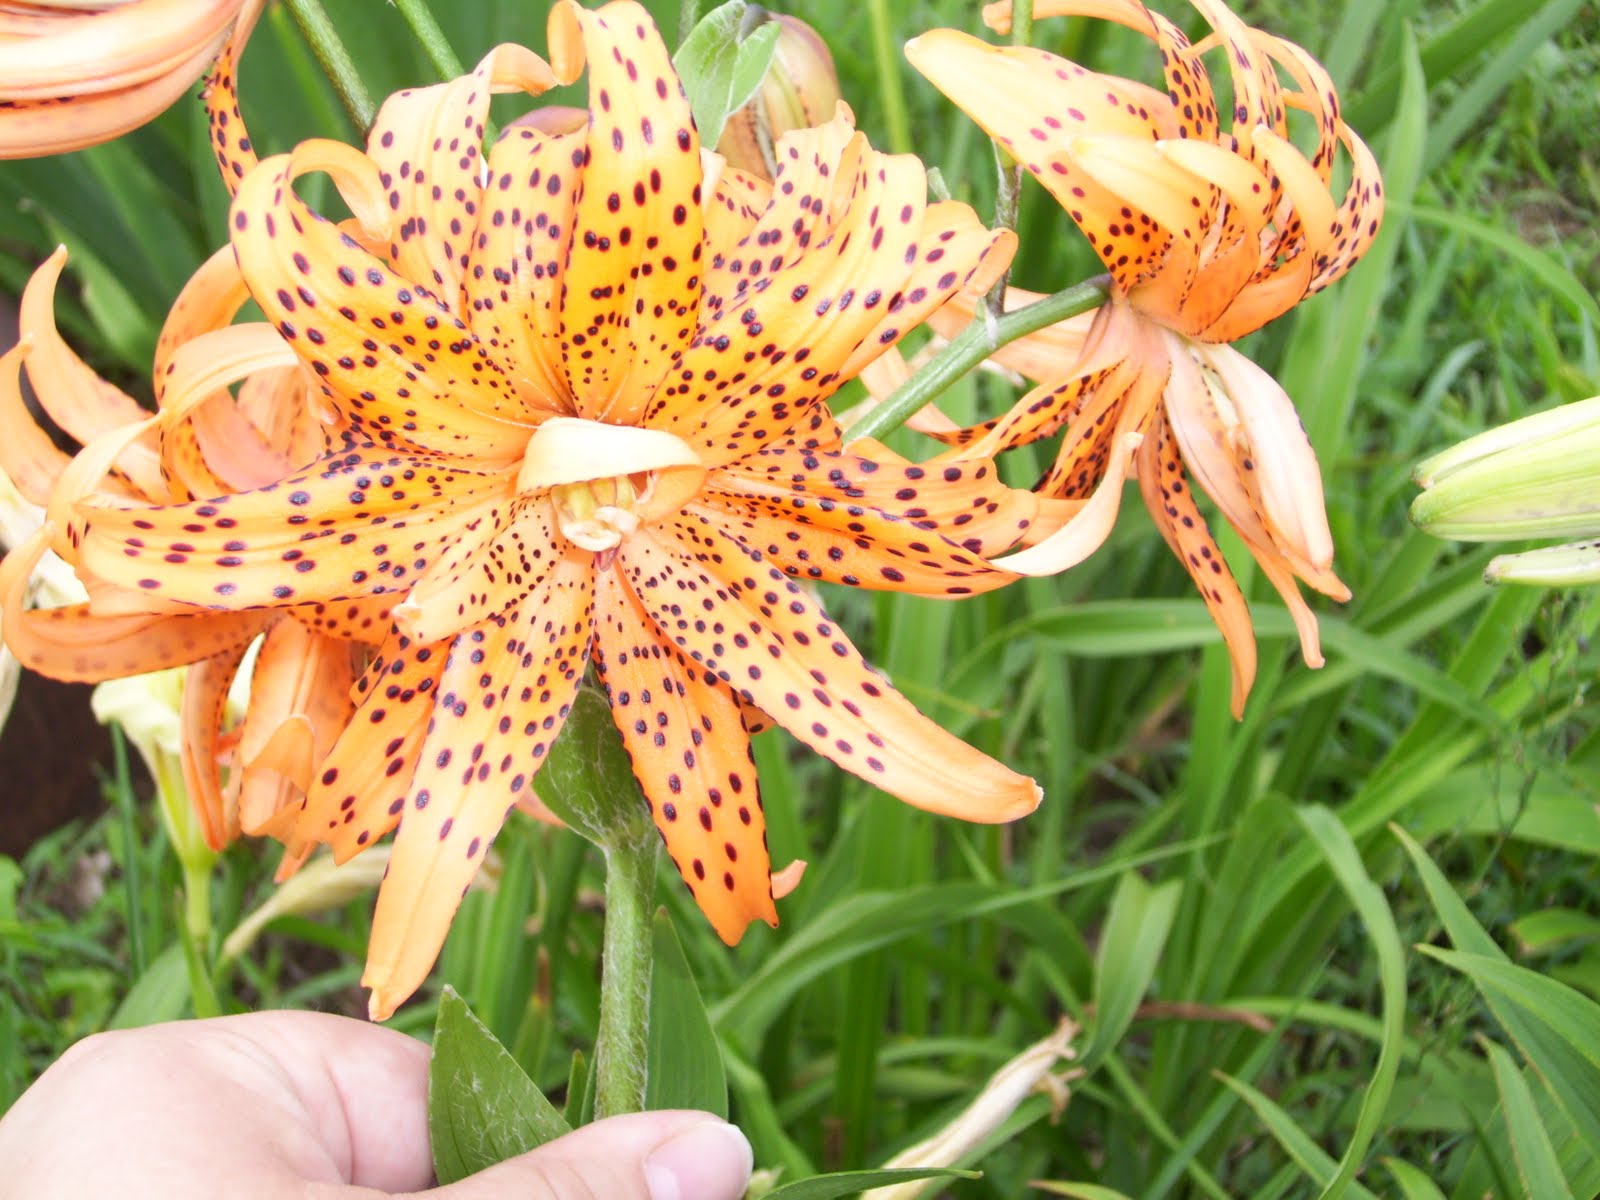 Tiger Lily Flowers